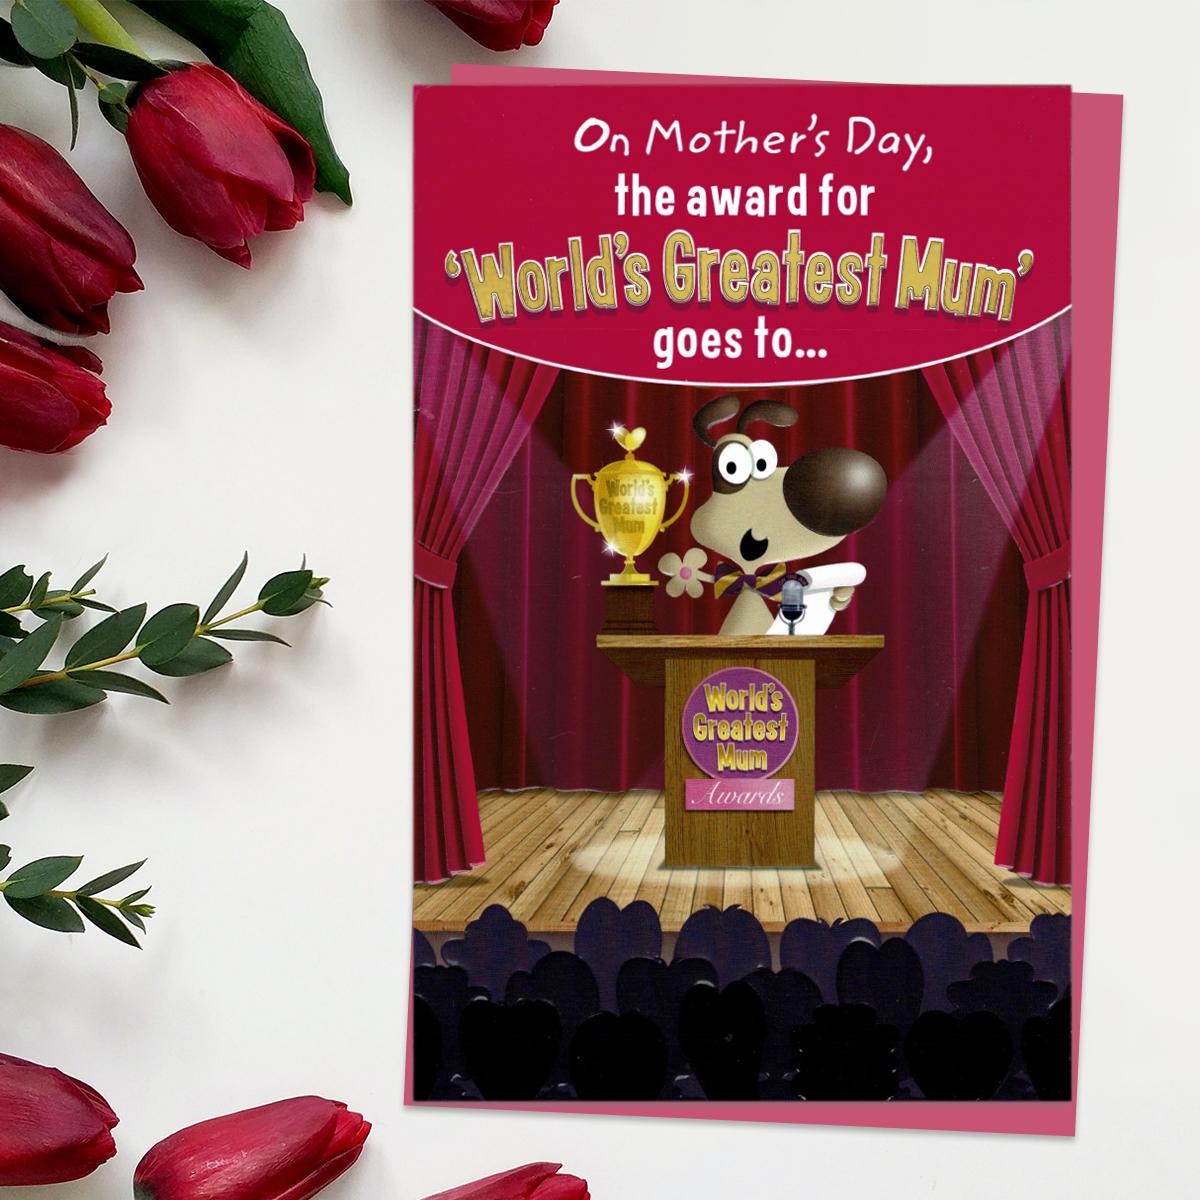 ' Worlds Greatest Mum' Award Mother's Day Card With Pop Out Trophy Inside. Complete With Bright Pink Envelope